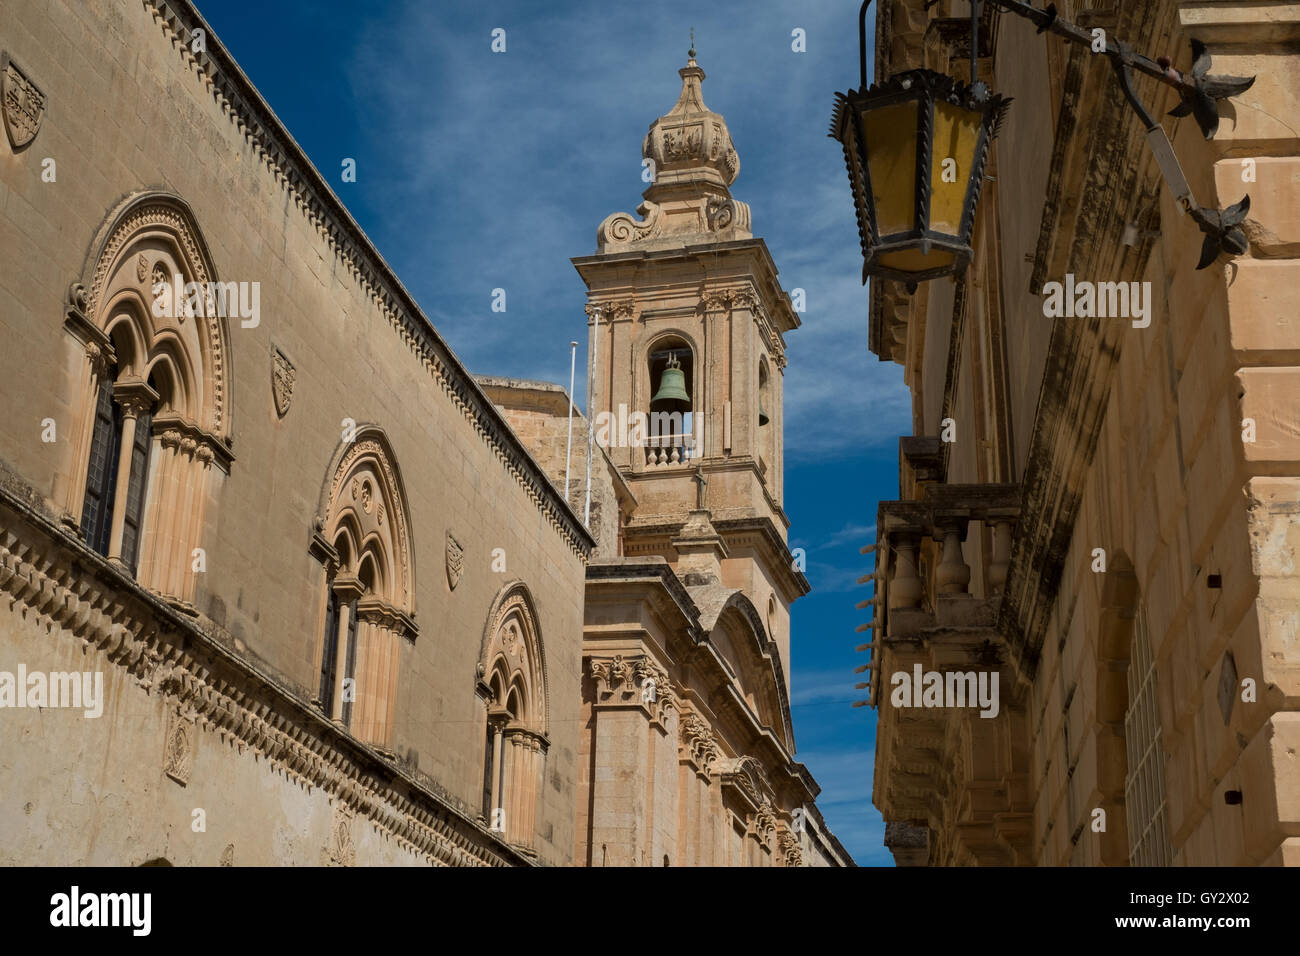 Quiet streets and church towers in the walled former capitol of Malta, Mdina Stock Photo